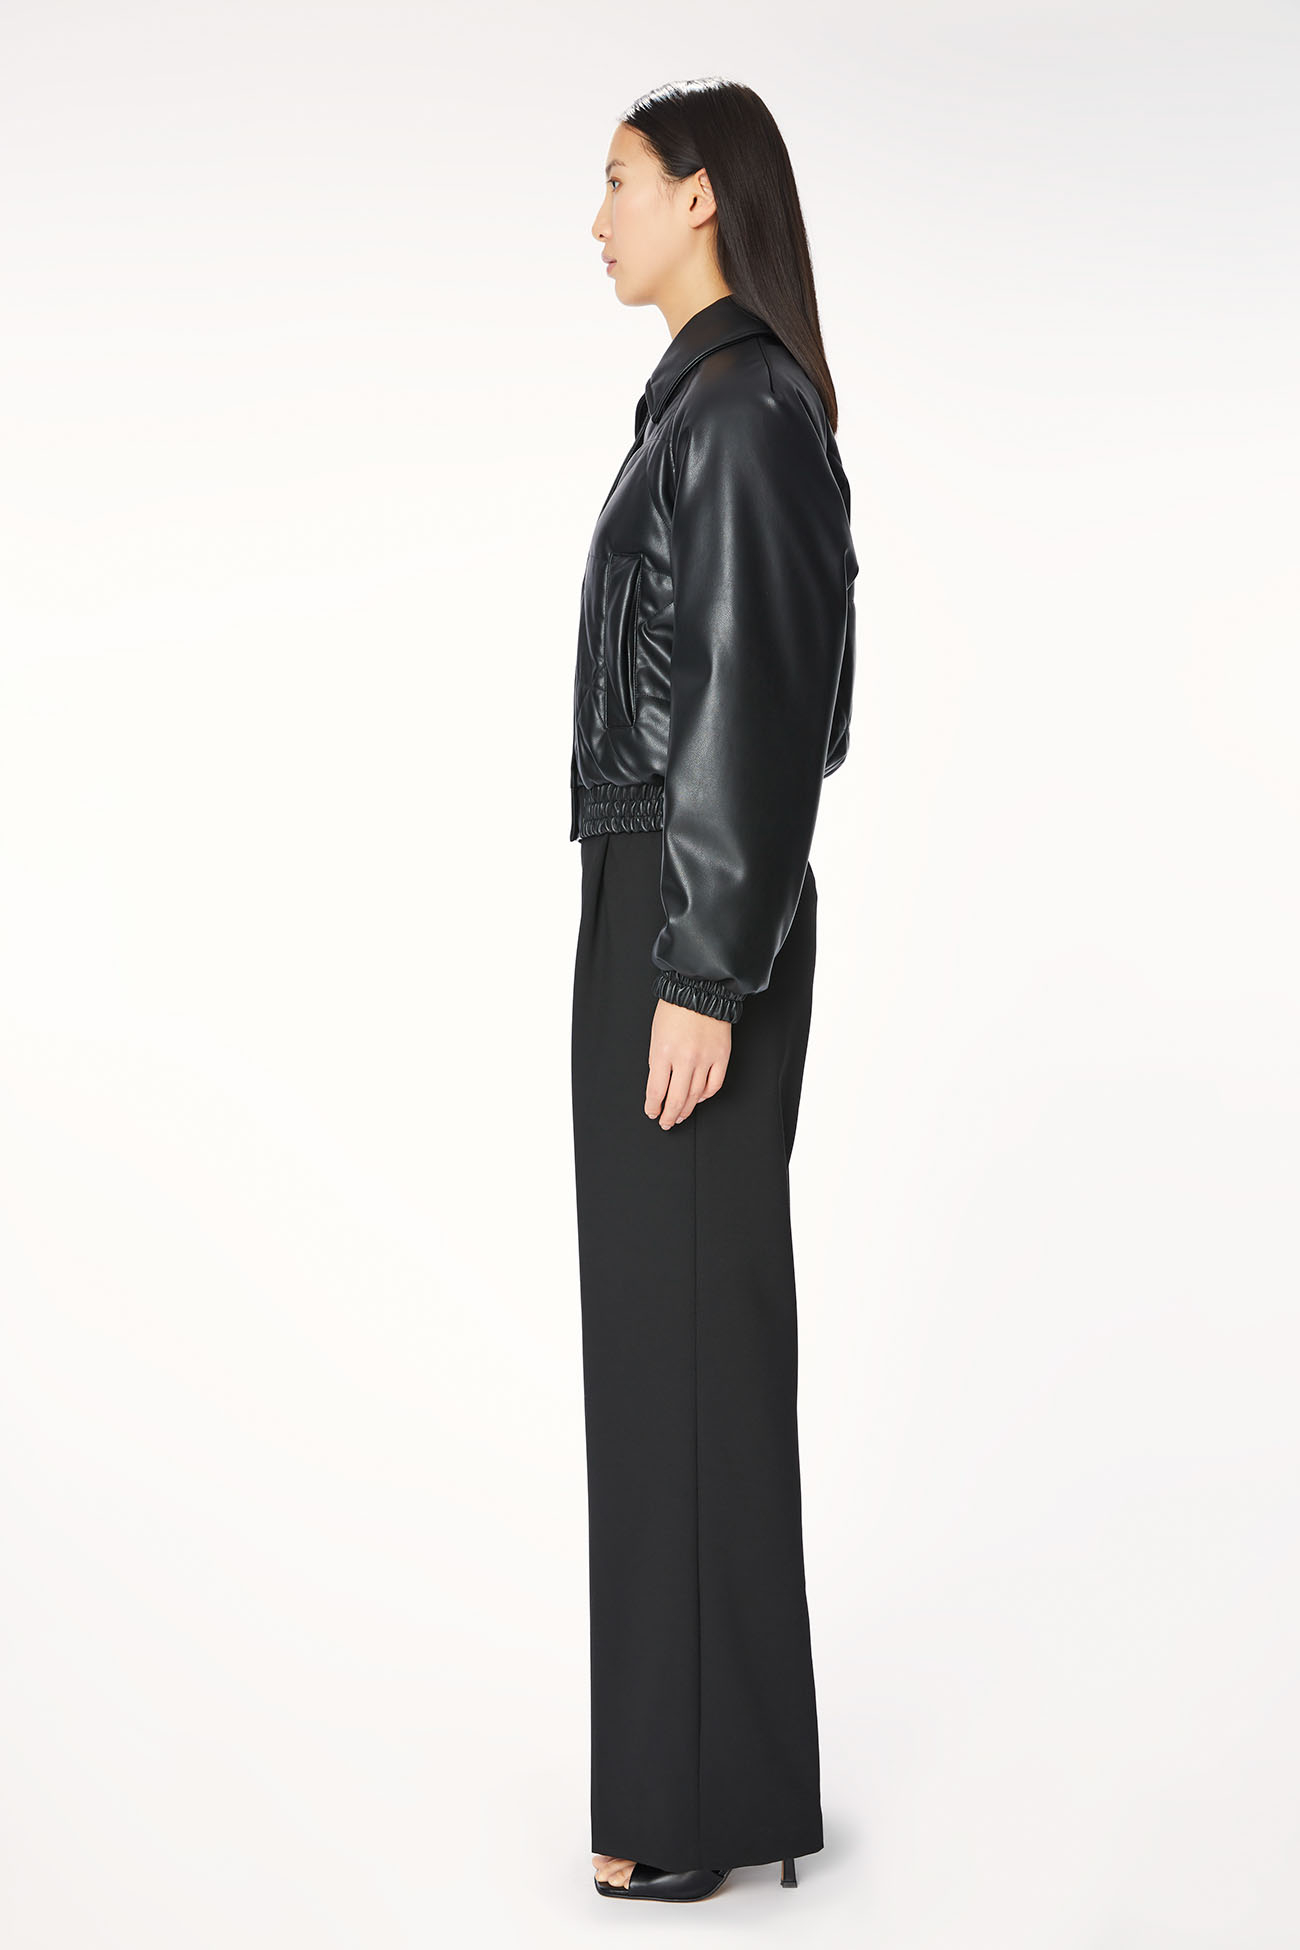 JACKET 9201 MADE IN ECO LEATHER - BLACK - OOF WEAR